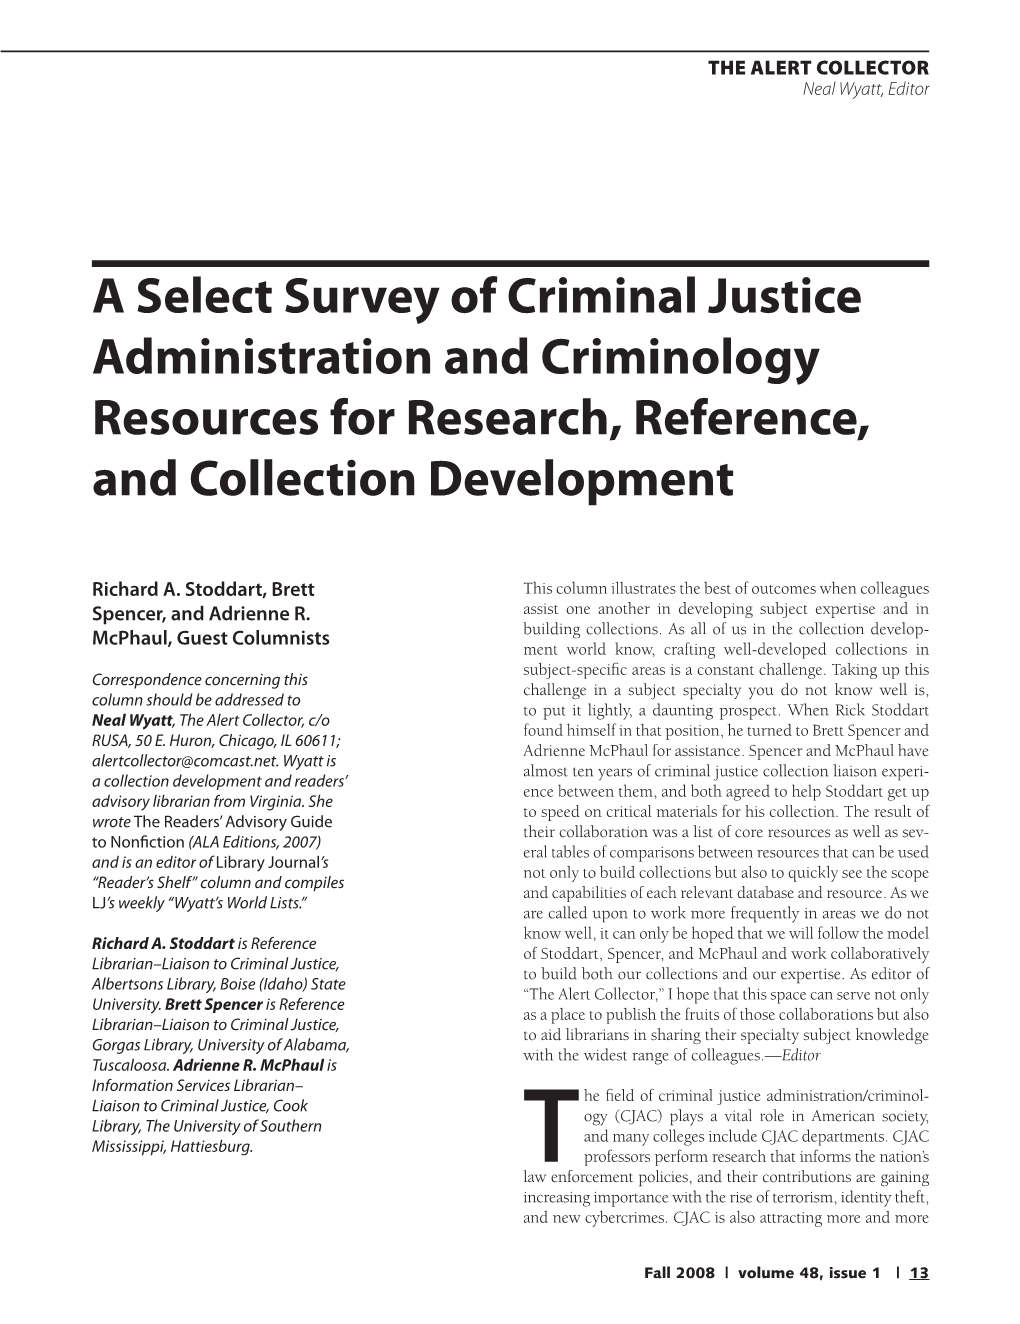 A Select Survey of Criminal Justice Administration and Criminology Resources for Research, Reference, and Collection Development